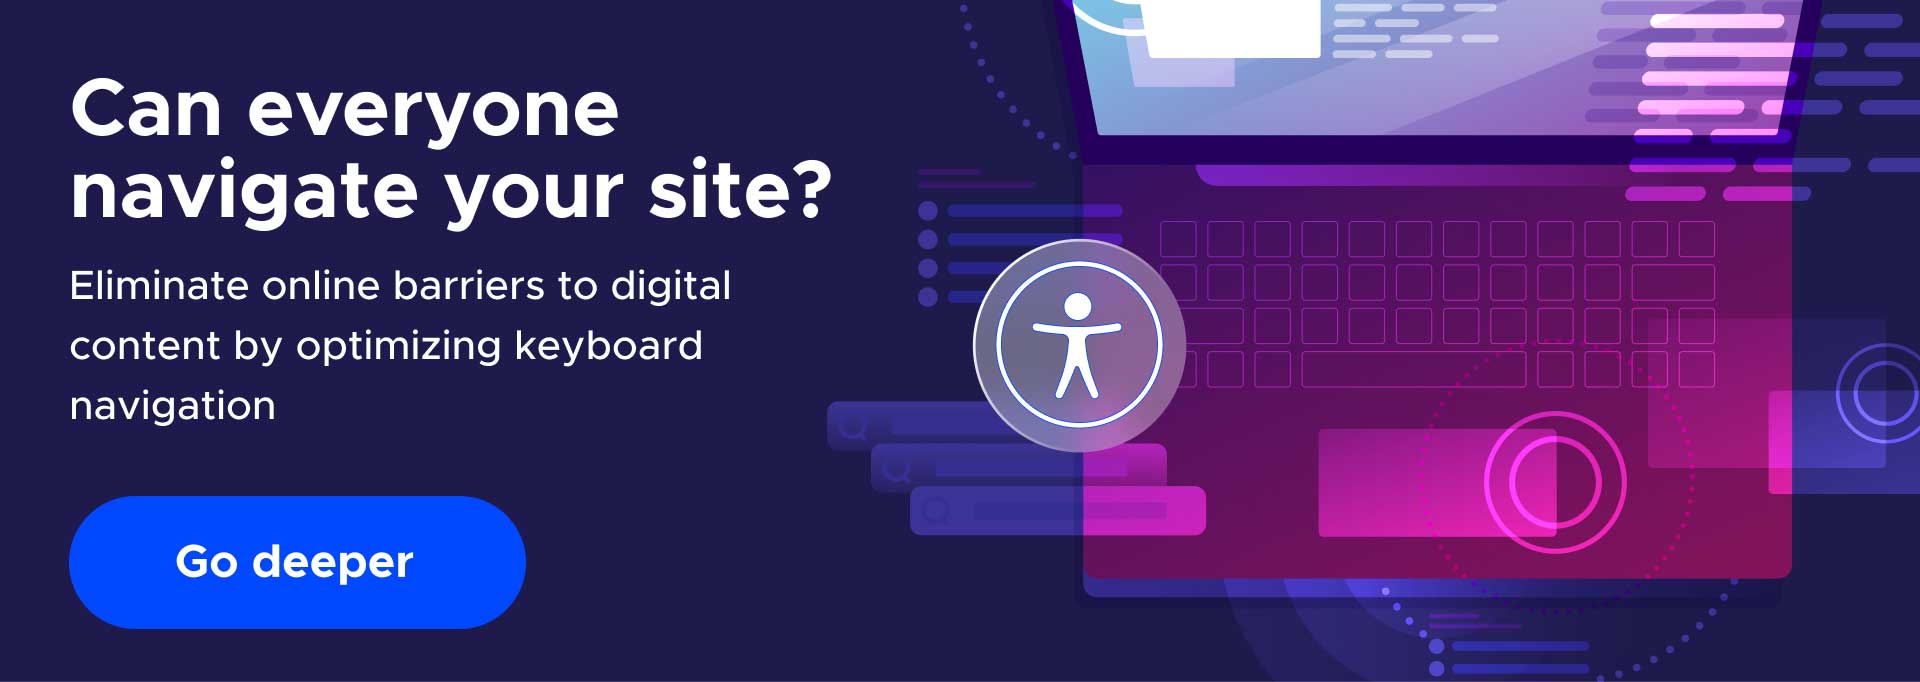 Can everyone navigate your site?  Eliminate online barriers to digital content by optimizing keyboard navigation